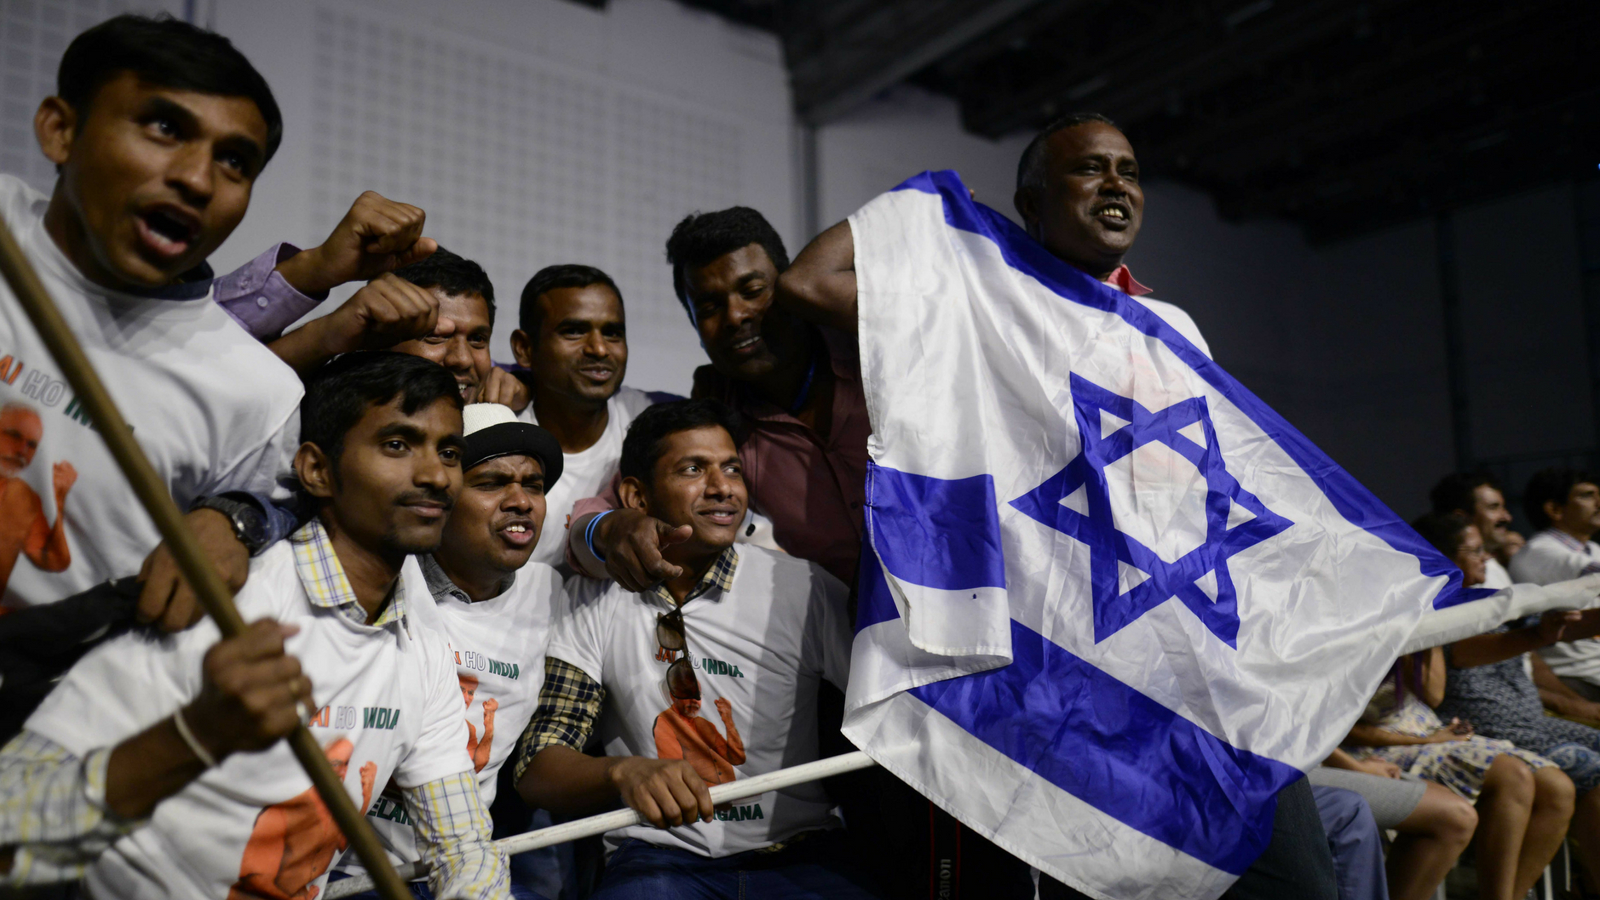 Members of the Indian community in Israel celebrating 25 years of Israel-India relations during the official visit of Indian Prime Minister Narendra Modi in Tel Aviv in July 2017. Photo by Tomer Neuberg/FLASH90